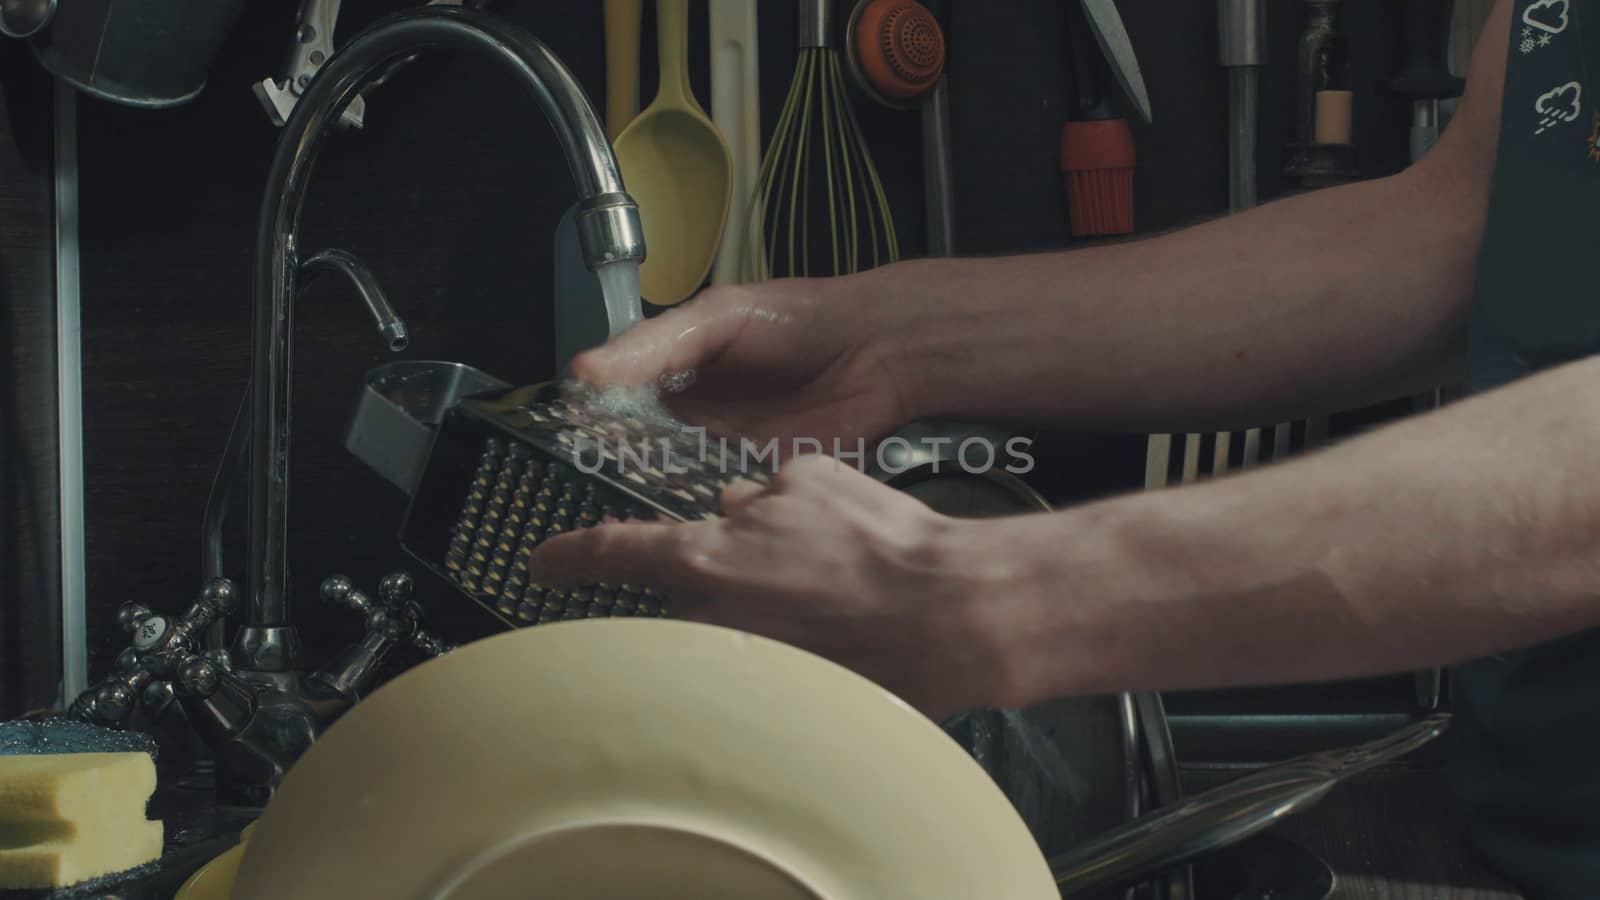 Man's hands washing dishes in kitchen sink, close up